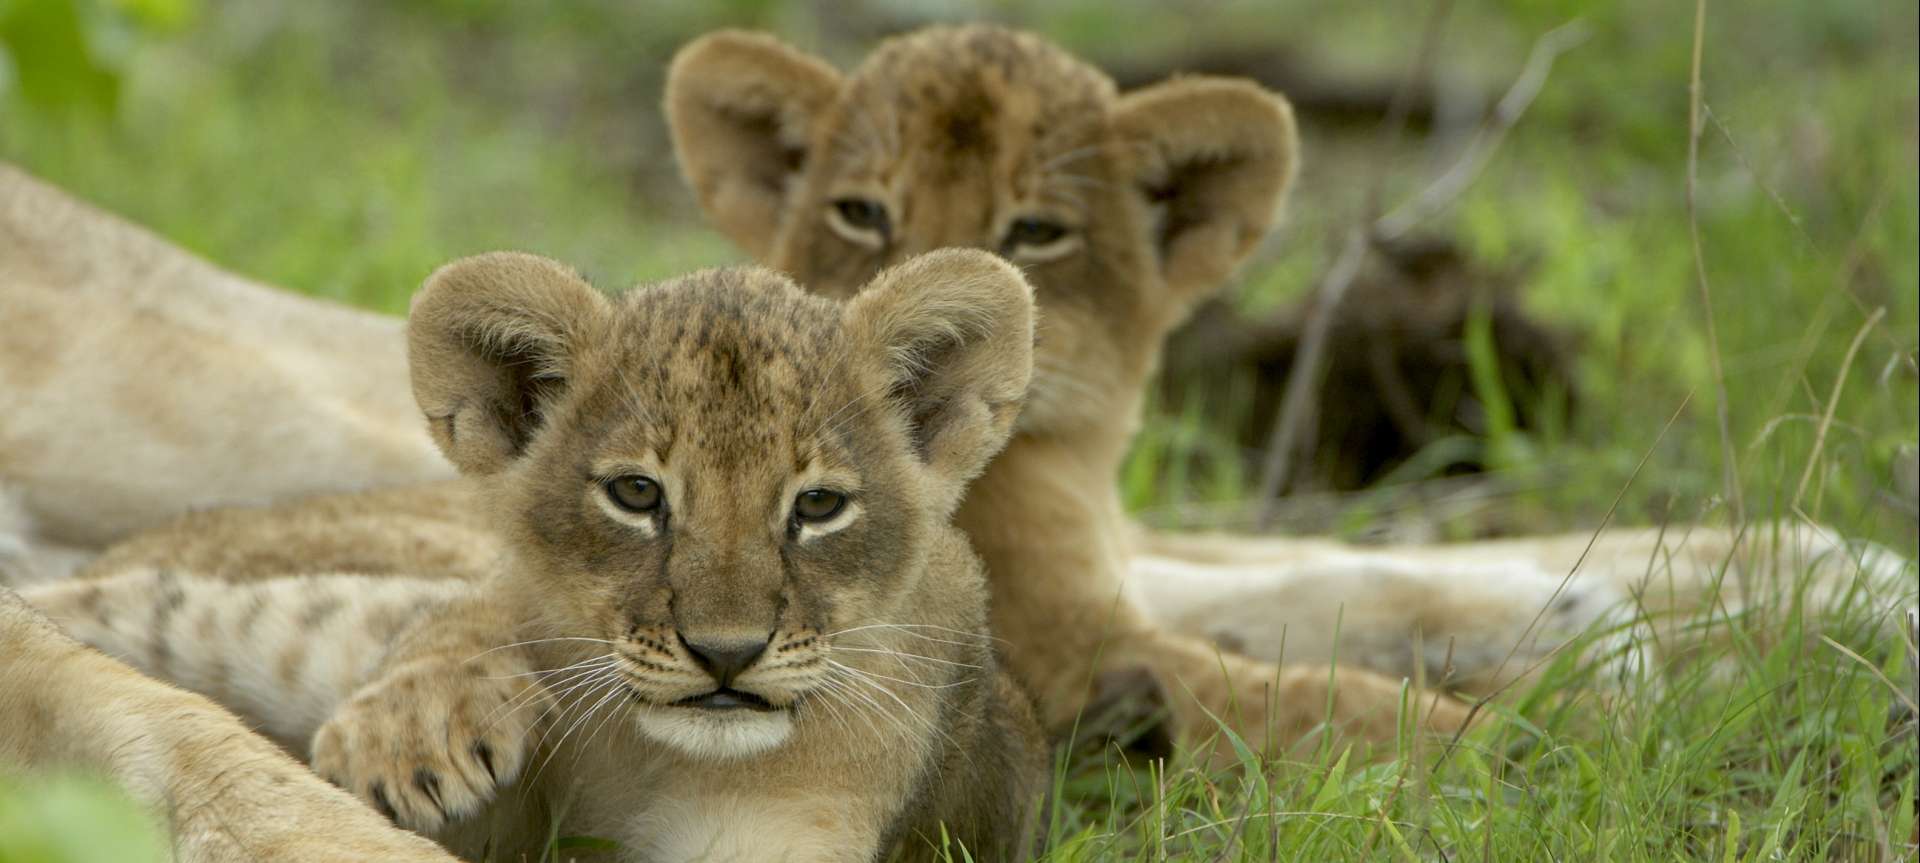 Big cat safaris in Africa Packages & Itineraries Discover Africa